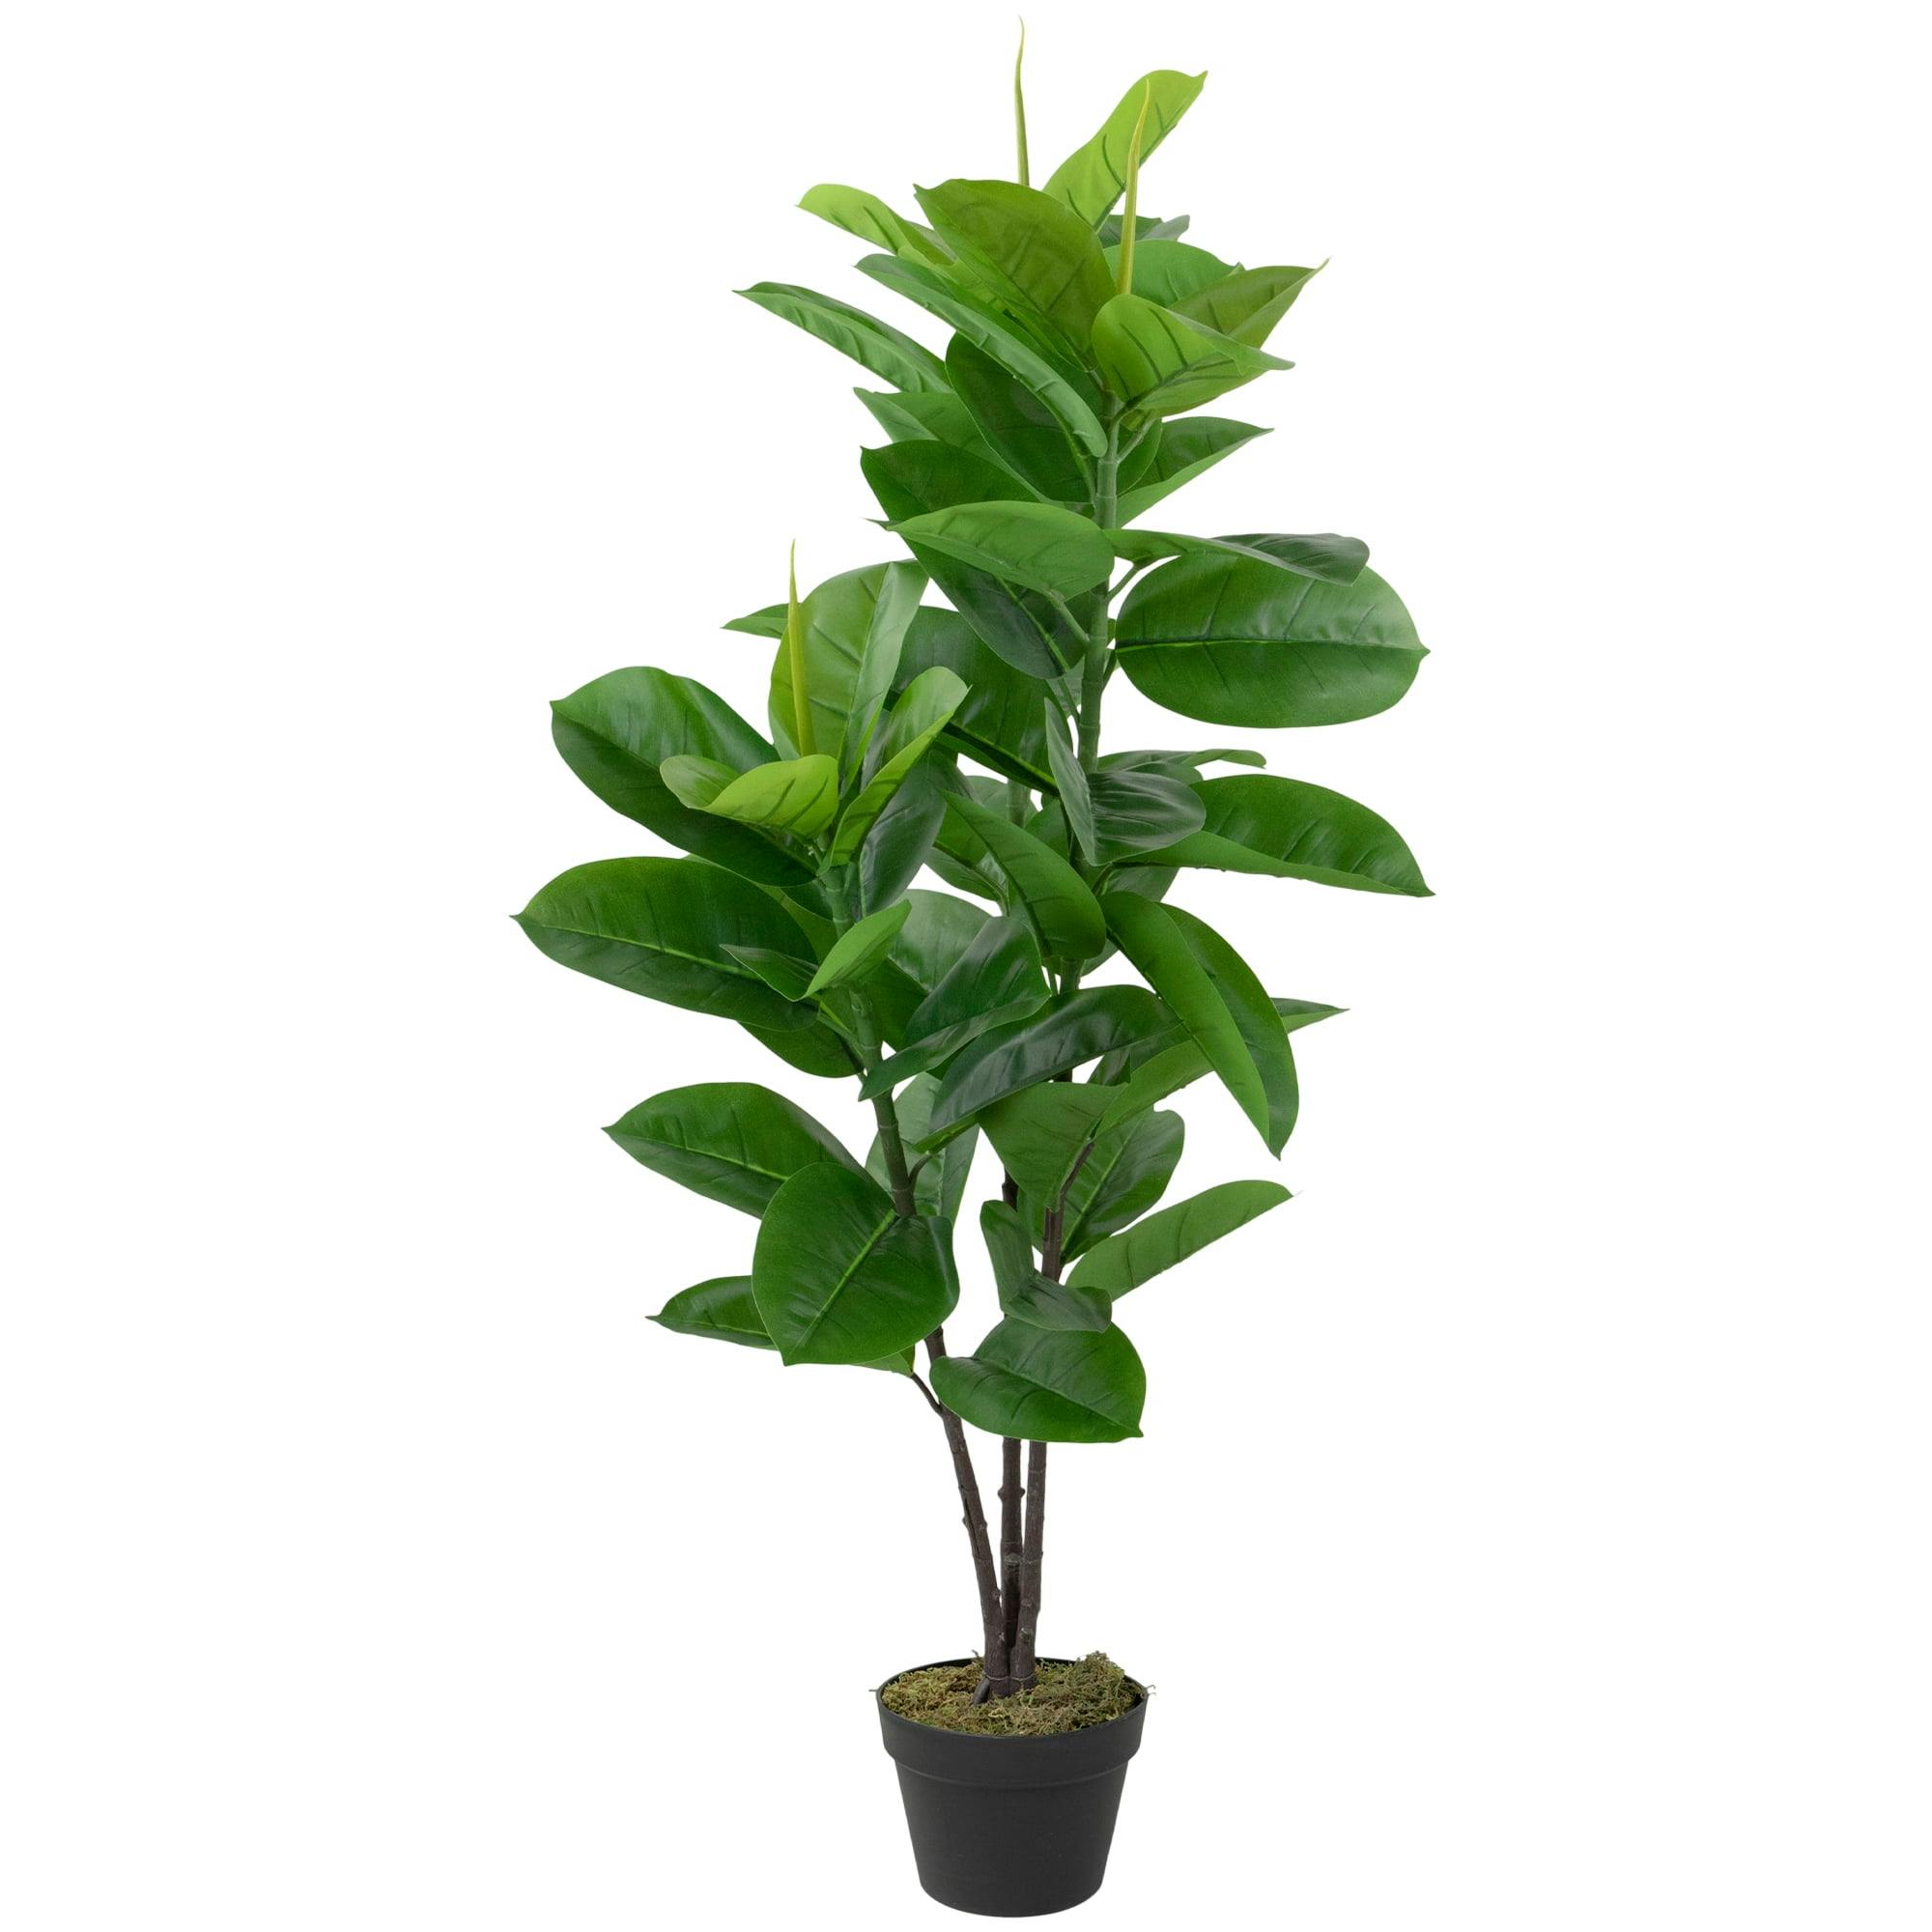 Lifelike Green and Red 51" Rubber Plant in Black Pot